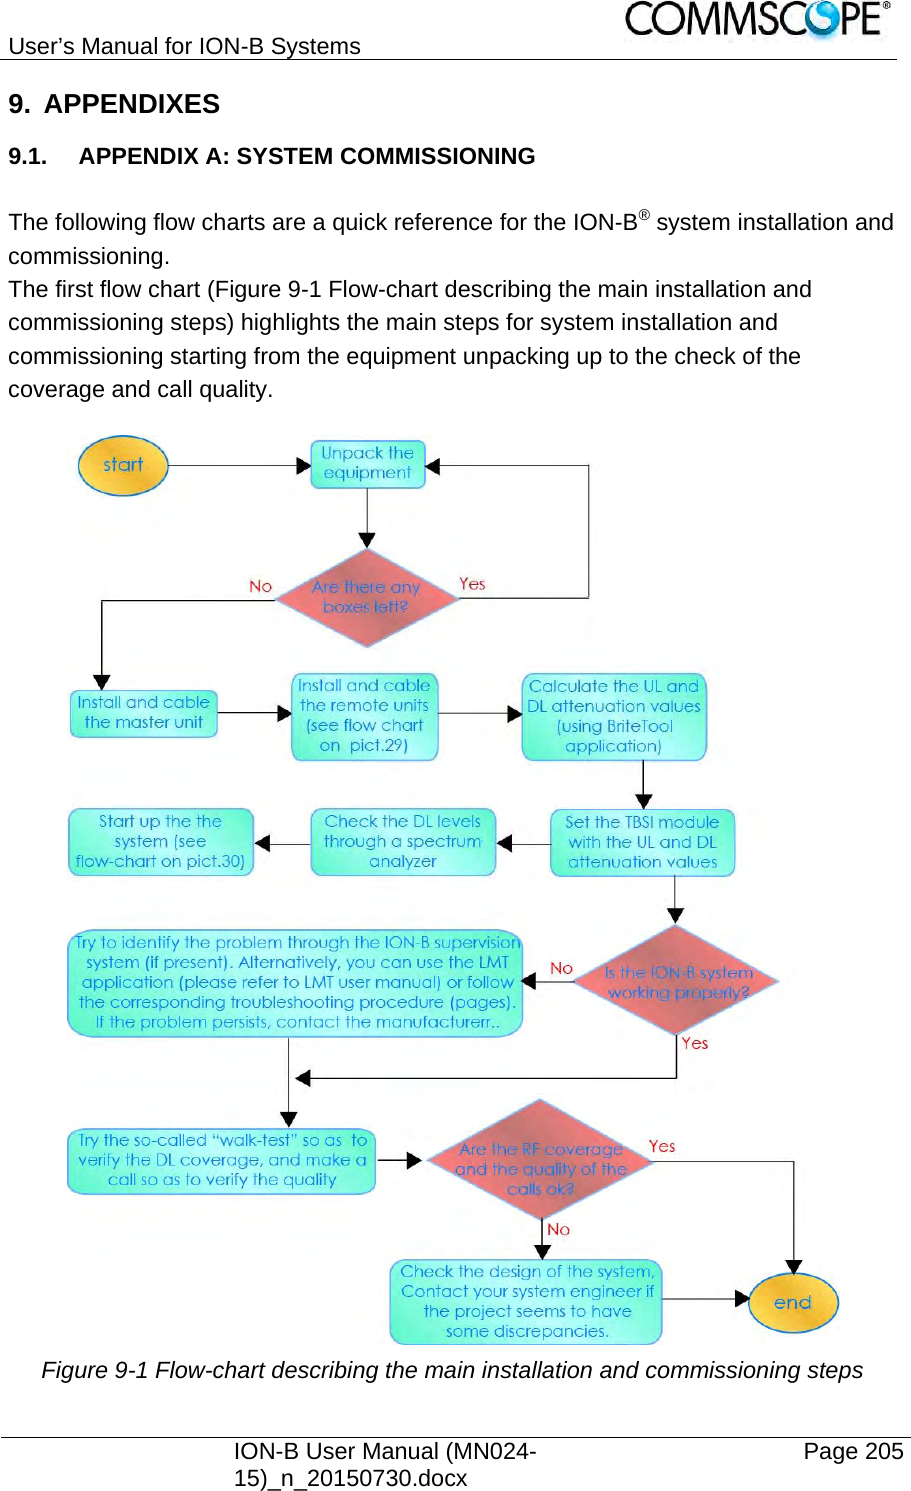 User’s Manual for ION-B Systems    ION-B User Manual (MN024-15)_n_20150730.docx  Page 205 9. APPENDIXES 9.1.  APPENDIX A: SYSTEM COMMISSIONING  The following flow charts are a quick reference for the ION-B® system installation and commissioning. The first flow chart (Figure 9-1 Flow-chart describing the main installation and commissioning steps) highlights the main steps for system installation and commissioning starting from the equipment unpacking up to the check of the coverage and call quality.   Figure 9-1 Flow-chart describing the main installation and commissioning steps 